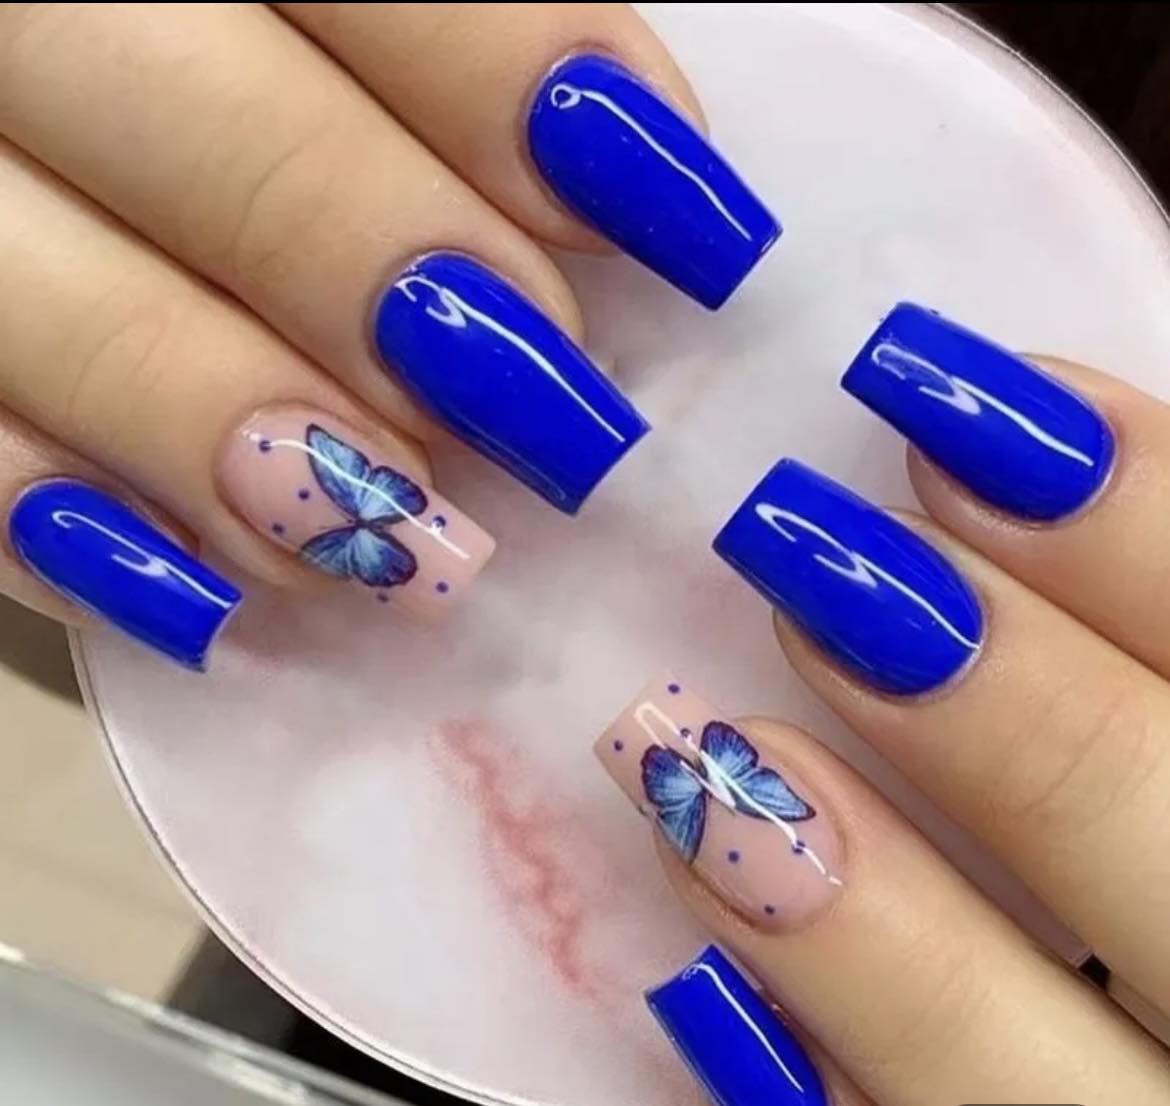 Medium Length Coffin Press on Nails. Ultra Blue with Butterflies. Easy and quick to apply. Great for those special occasions, parties or add an edge to any outfit. Gorgeous, flattering and you can re-use them again and again.